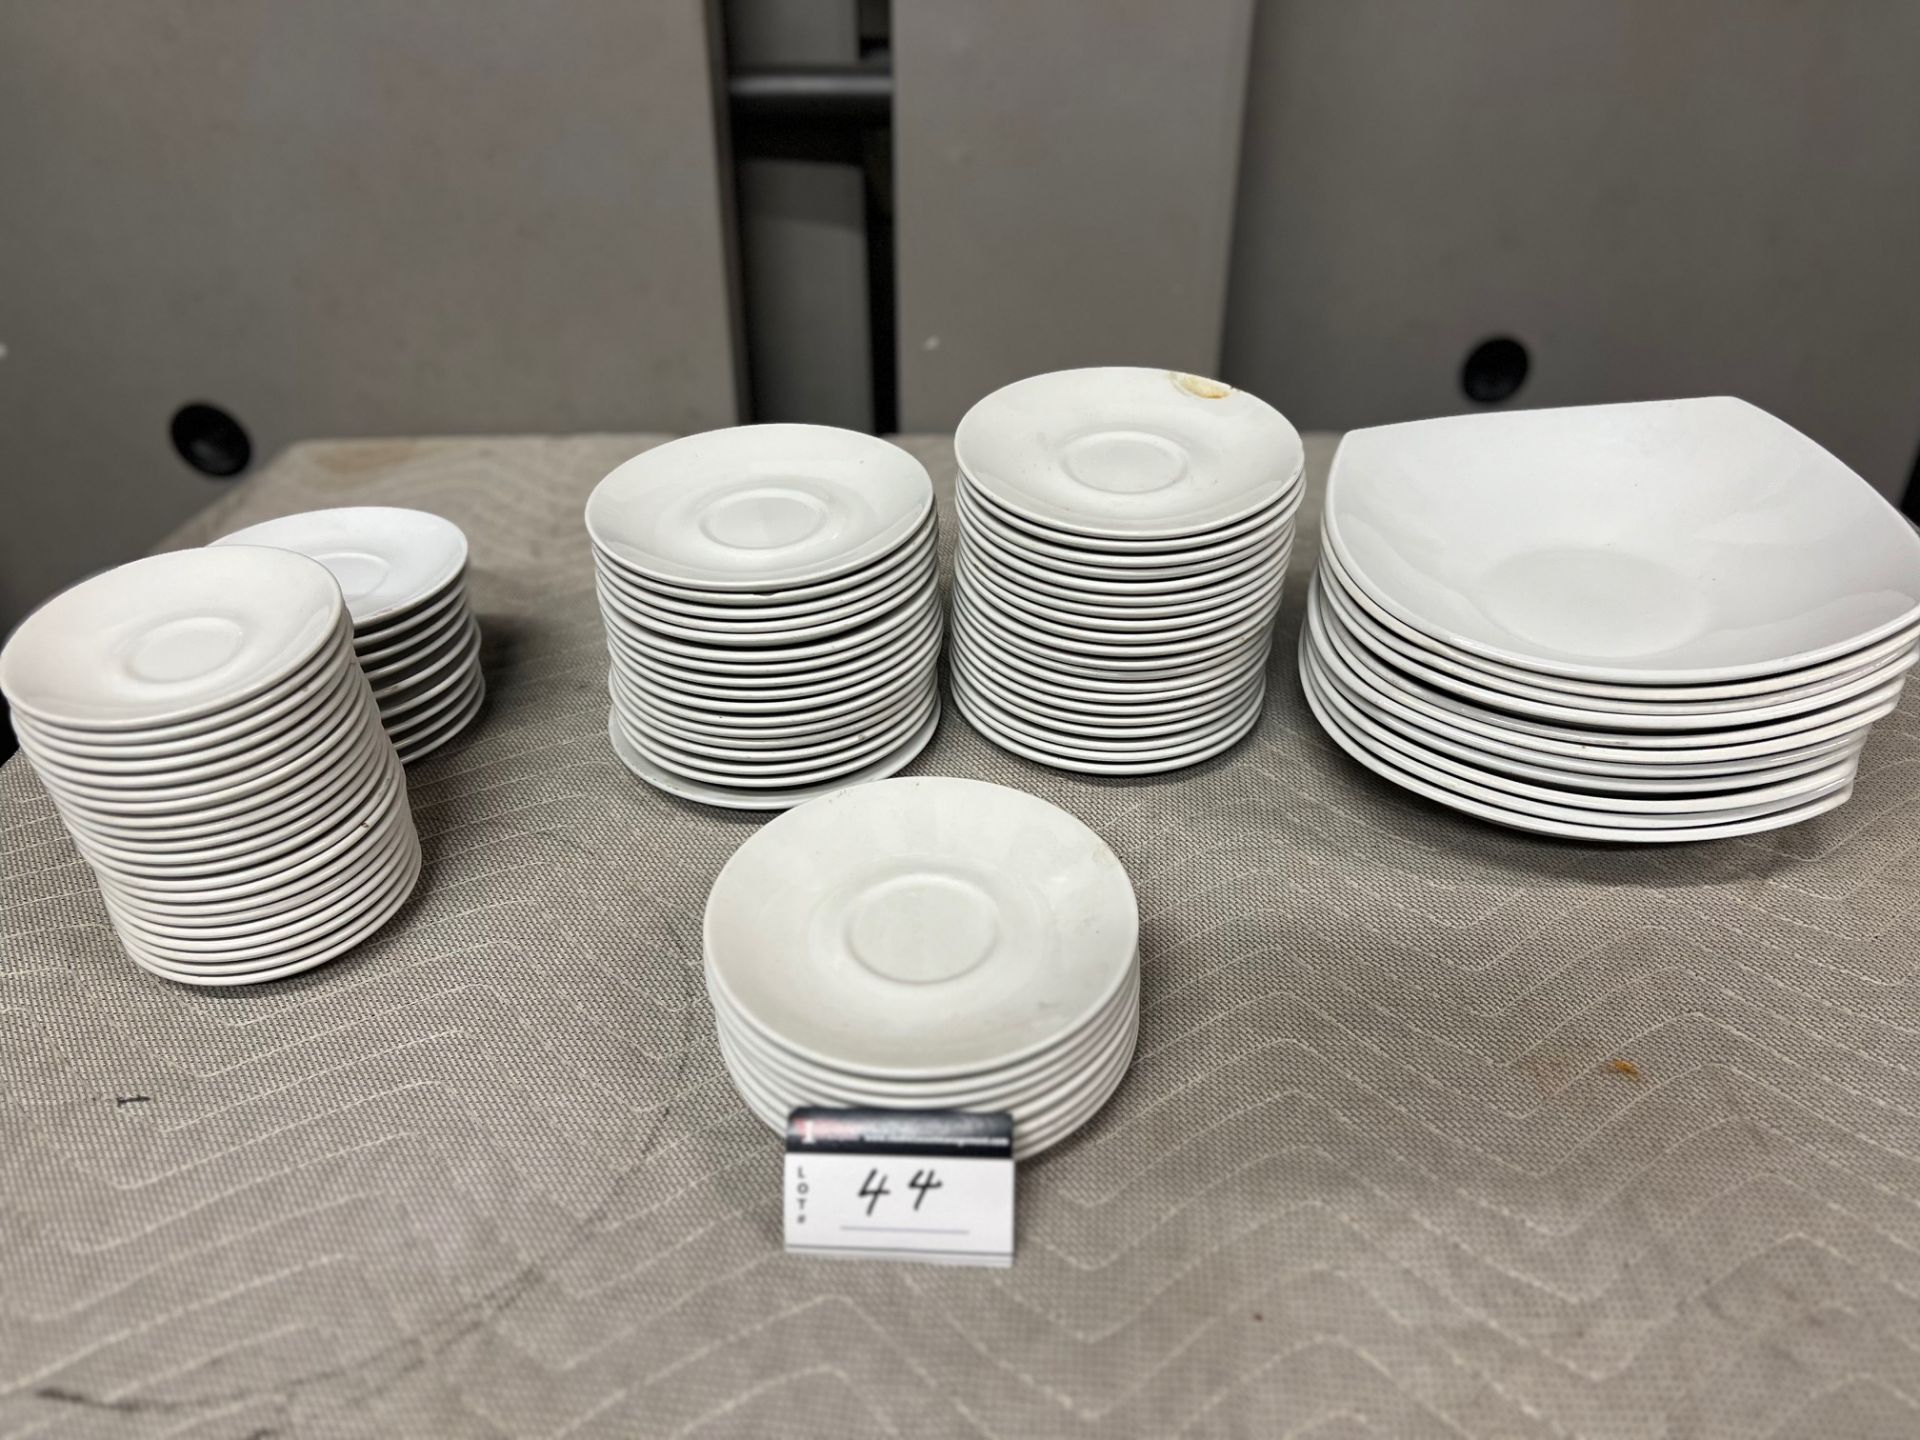 LOT/ ASSORTED PLATES, 11 PLATES, 60 SAUCERS - Image 2 of 3